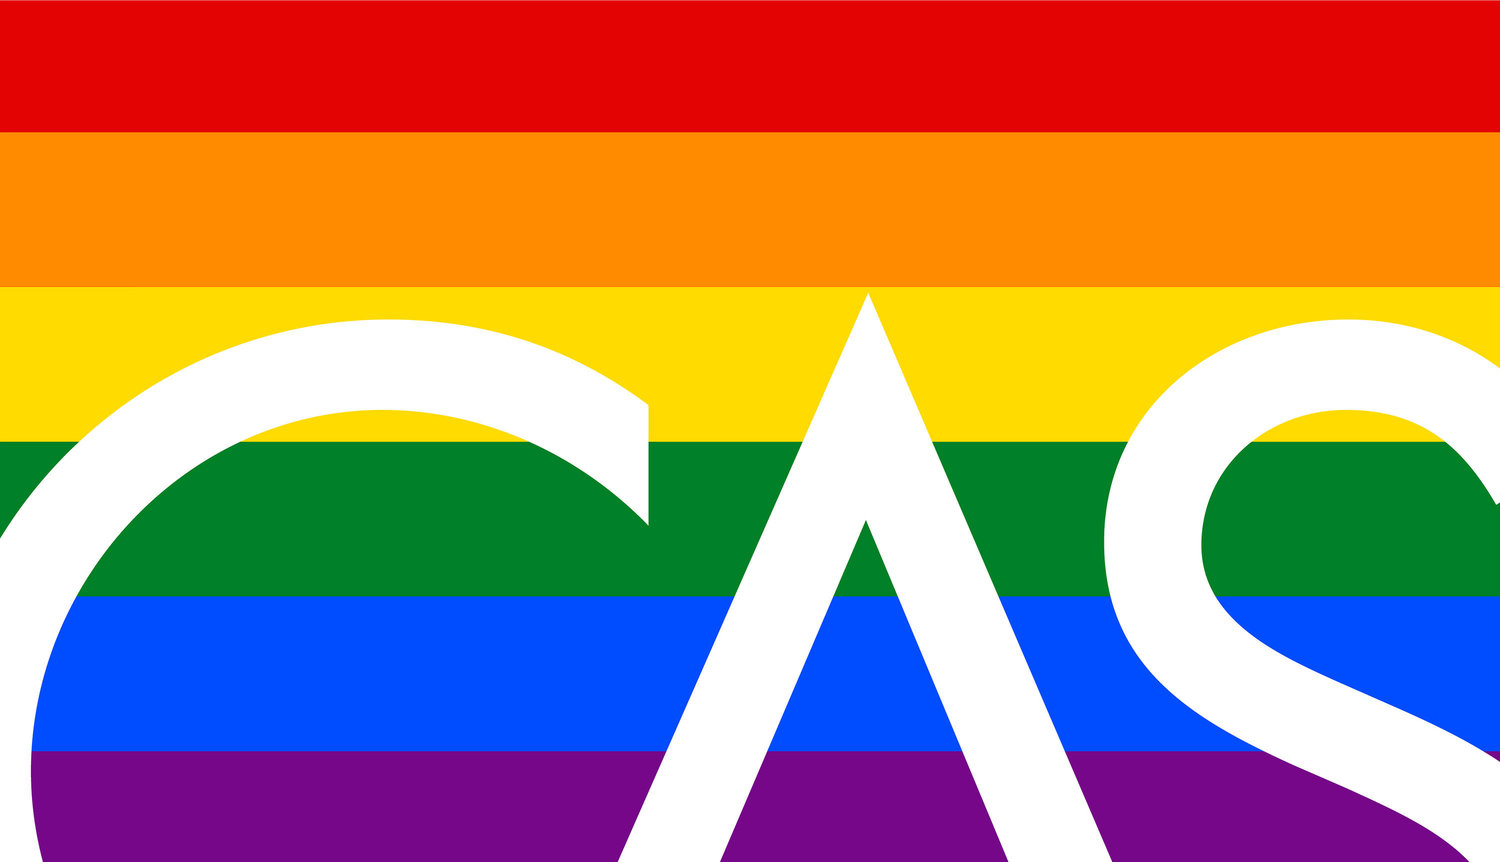 CAS will celebrate Pride (LGBTQIA+) month with a series of ongoing programs for people of all ages.